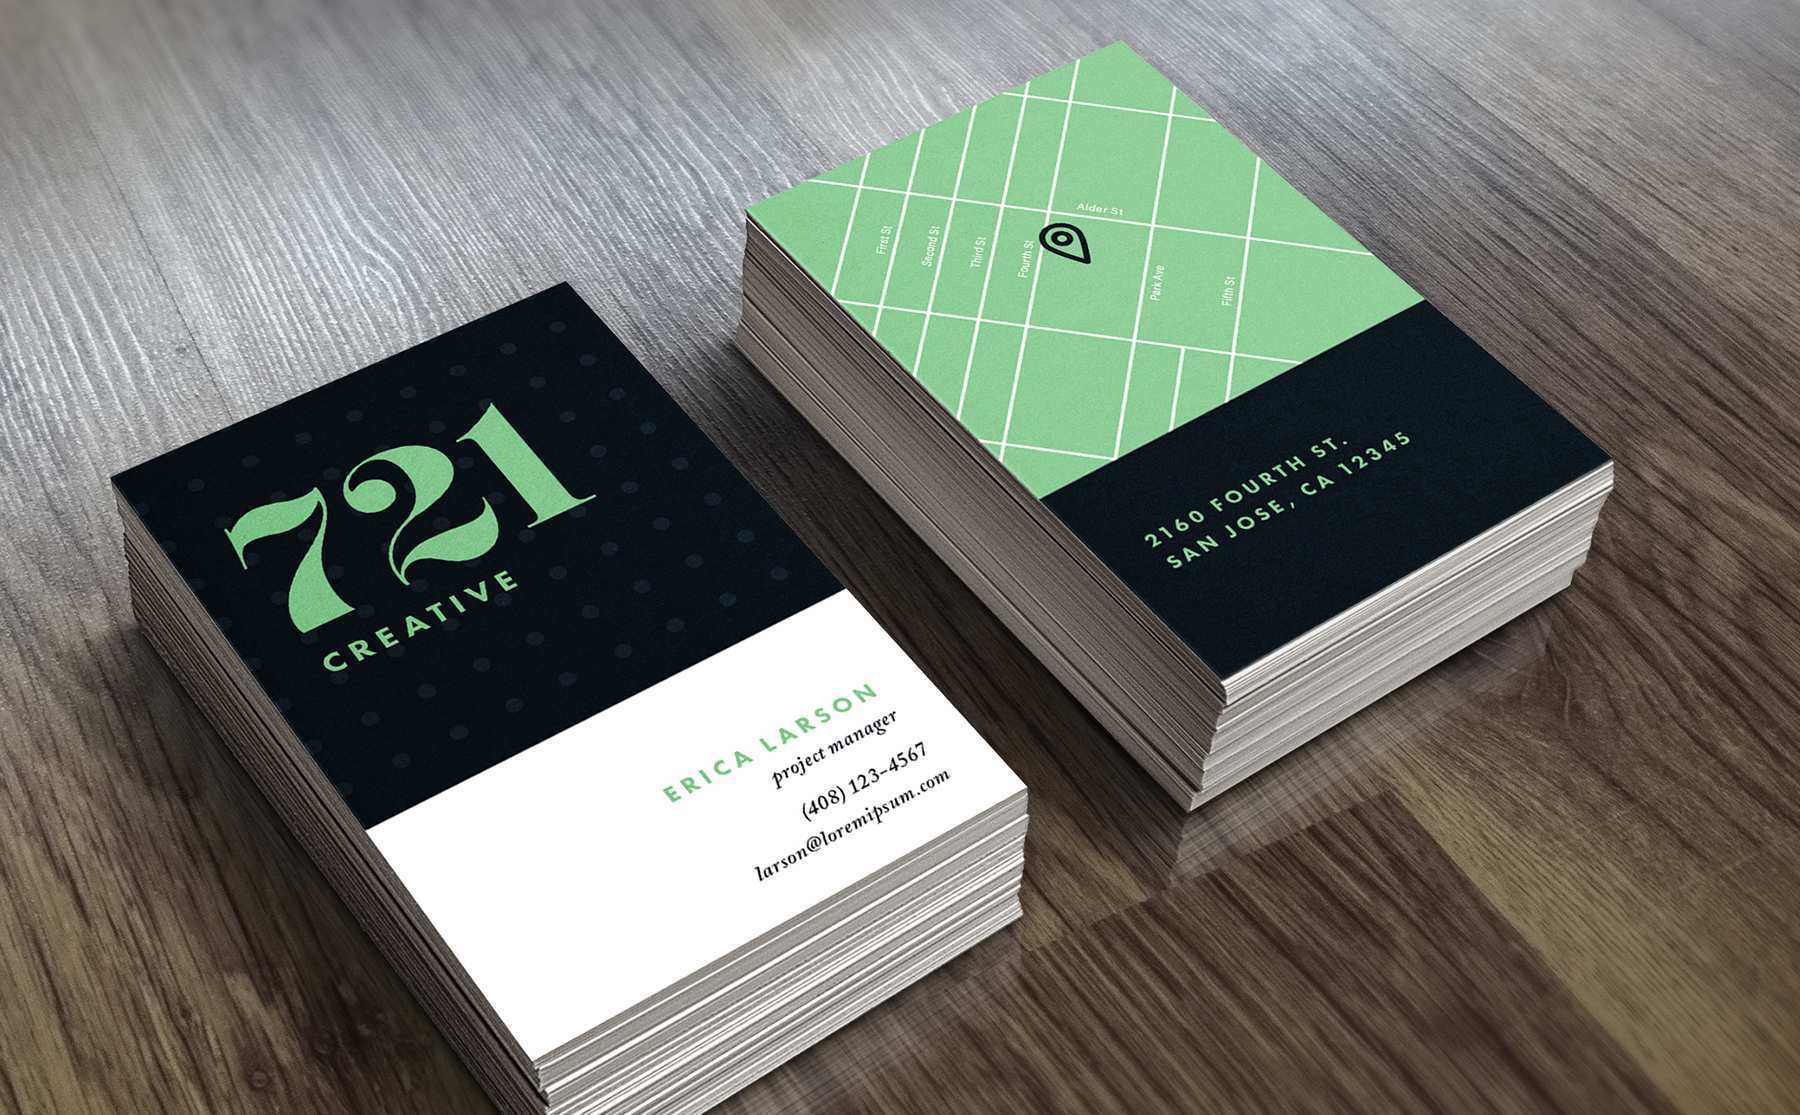 75 Free Business Card Template Illustrator Cc For Free with Business Card Template Illustrator Cc